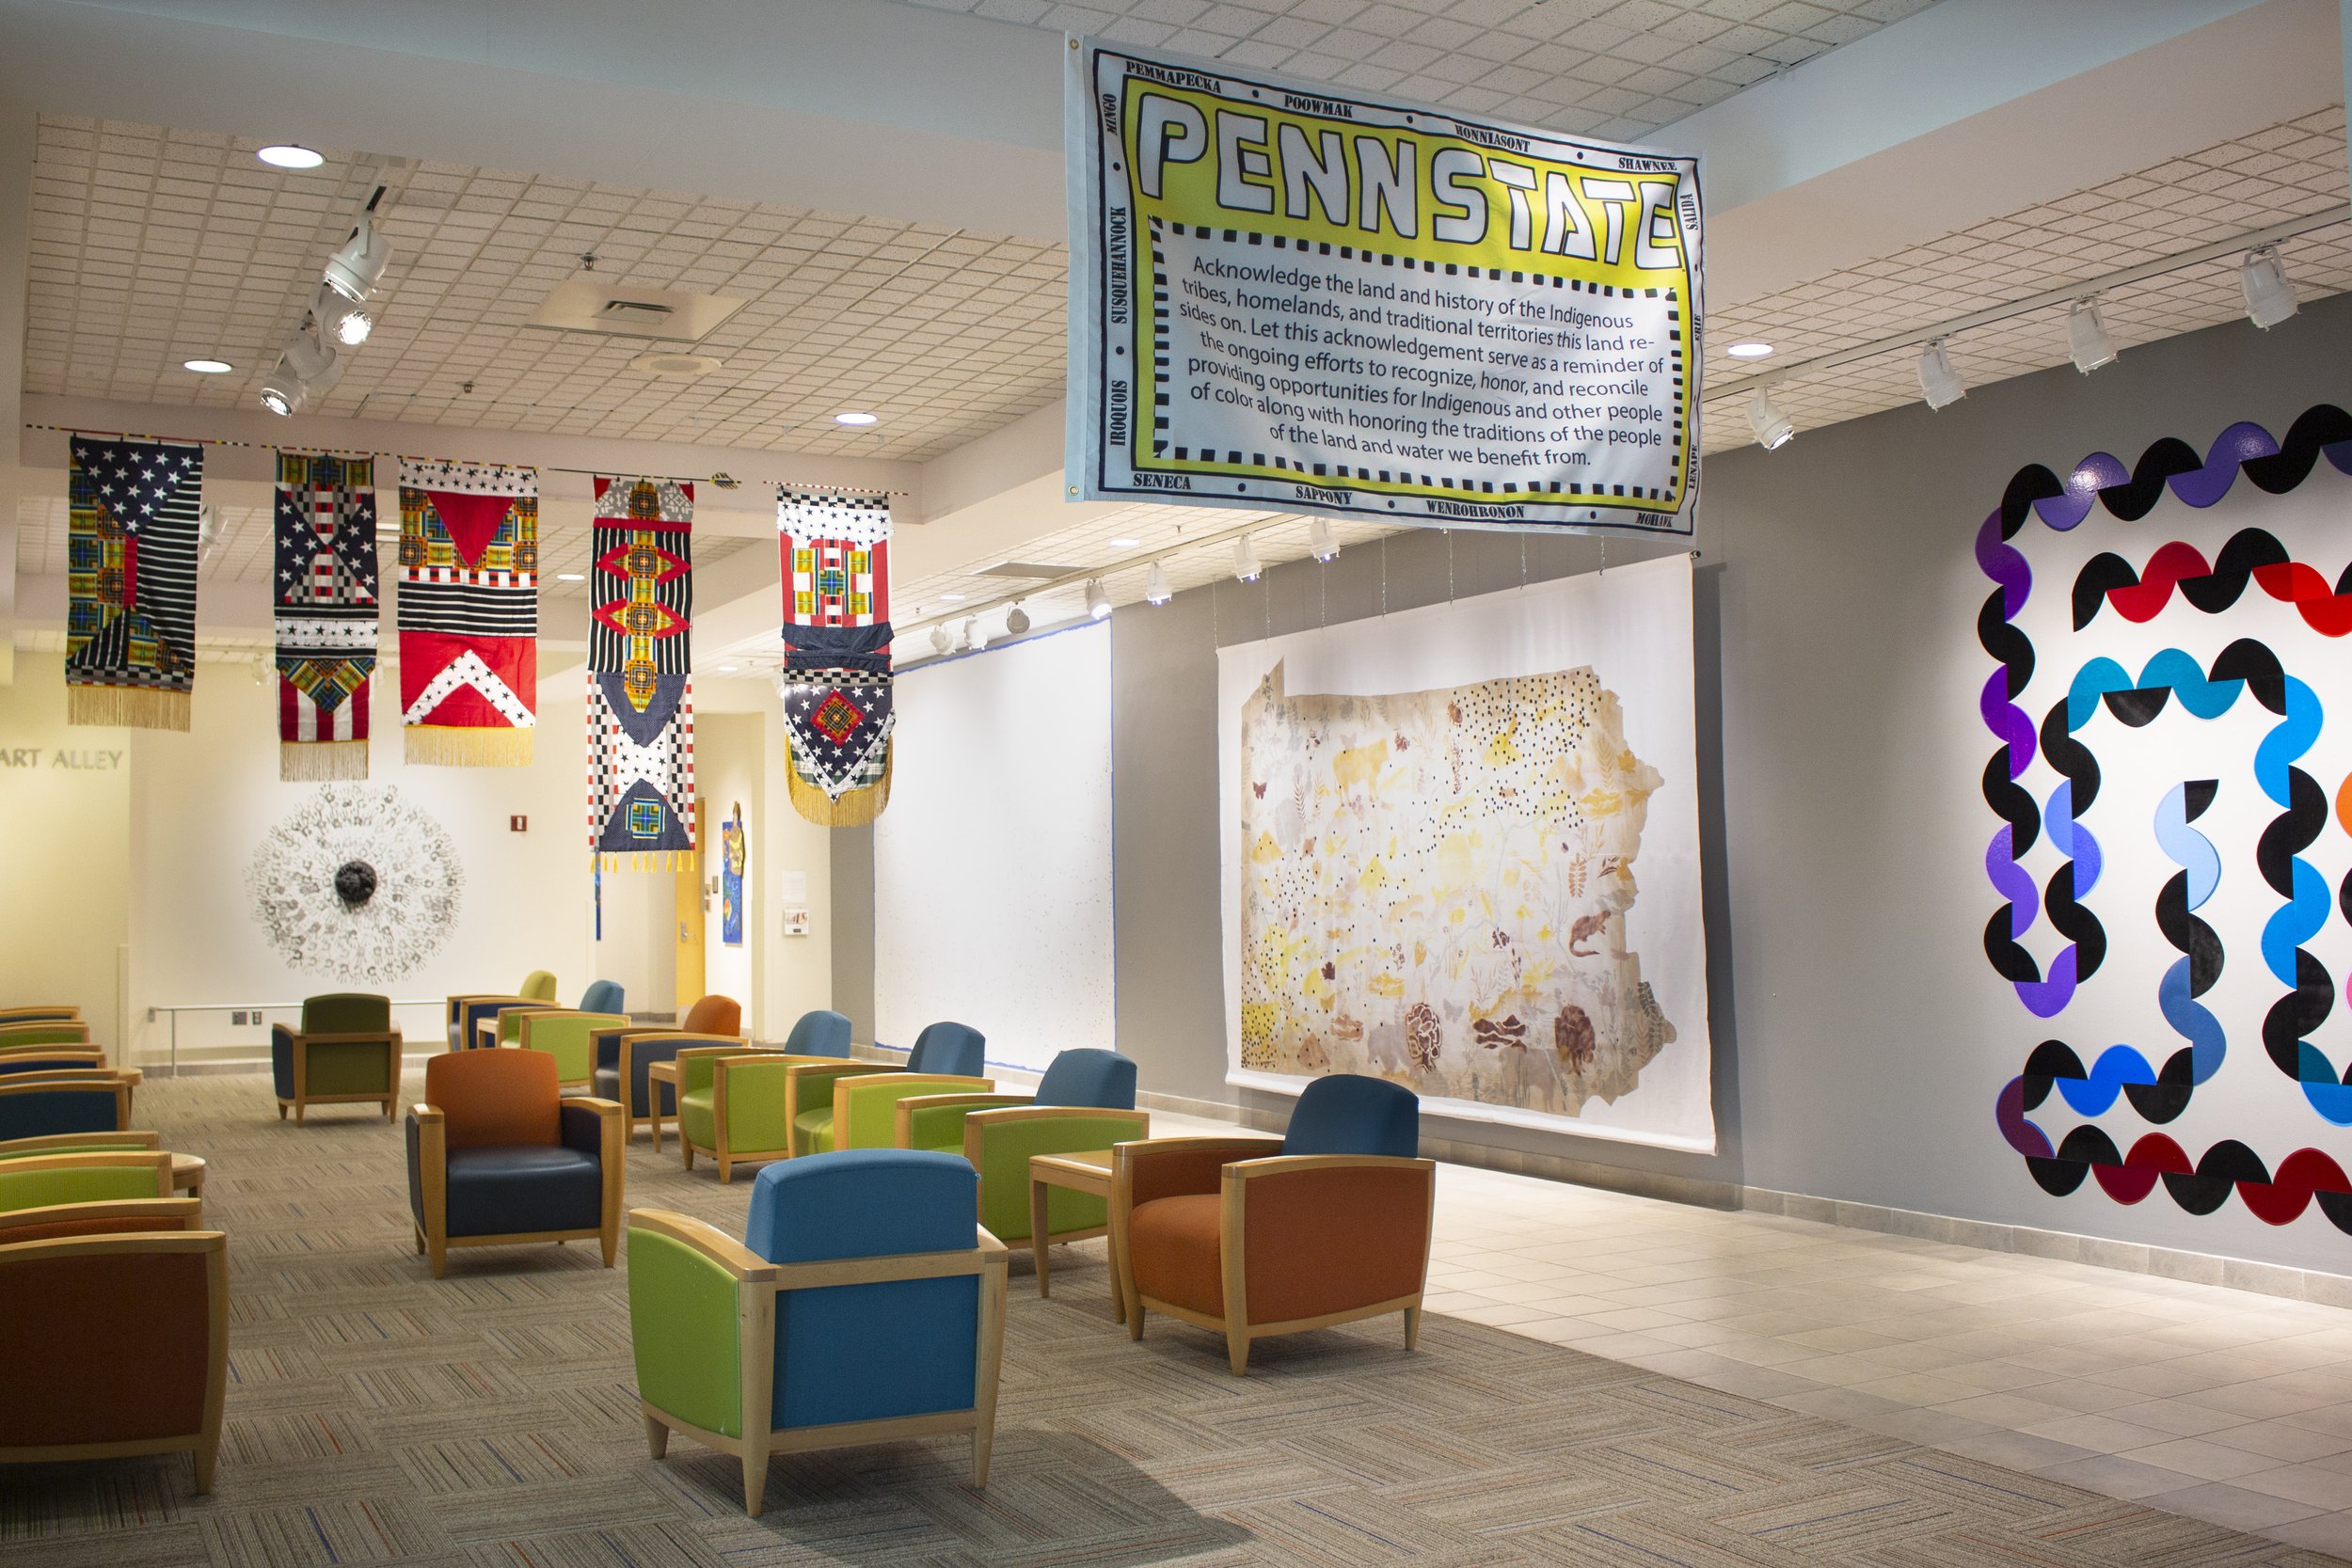  The Fractured State mural was displayed as part of the  C/O Commonwealth  exhibition in The Hub, Penn State’s main student center, over the summer of 2021.  